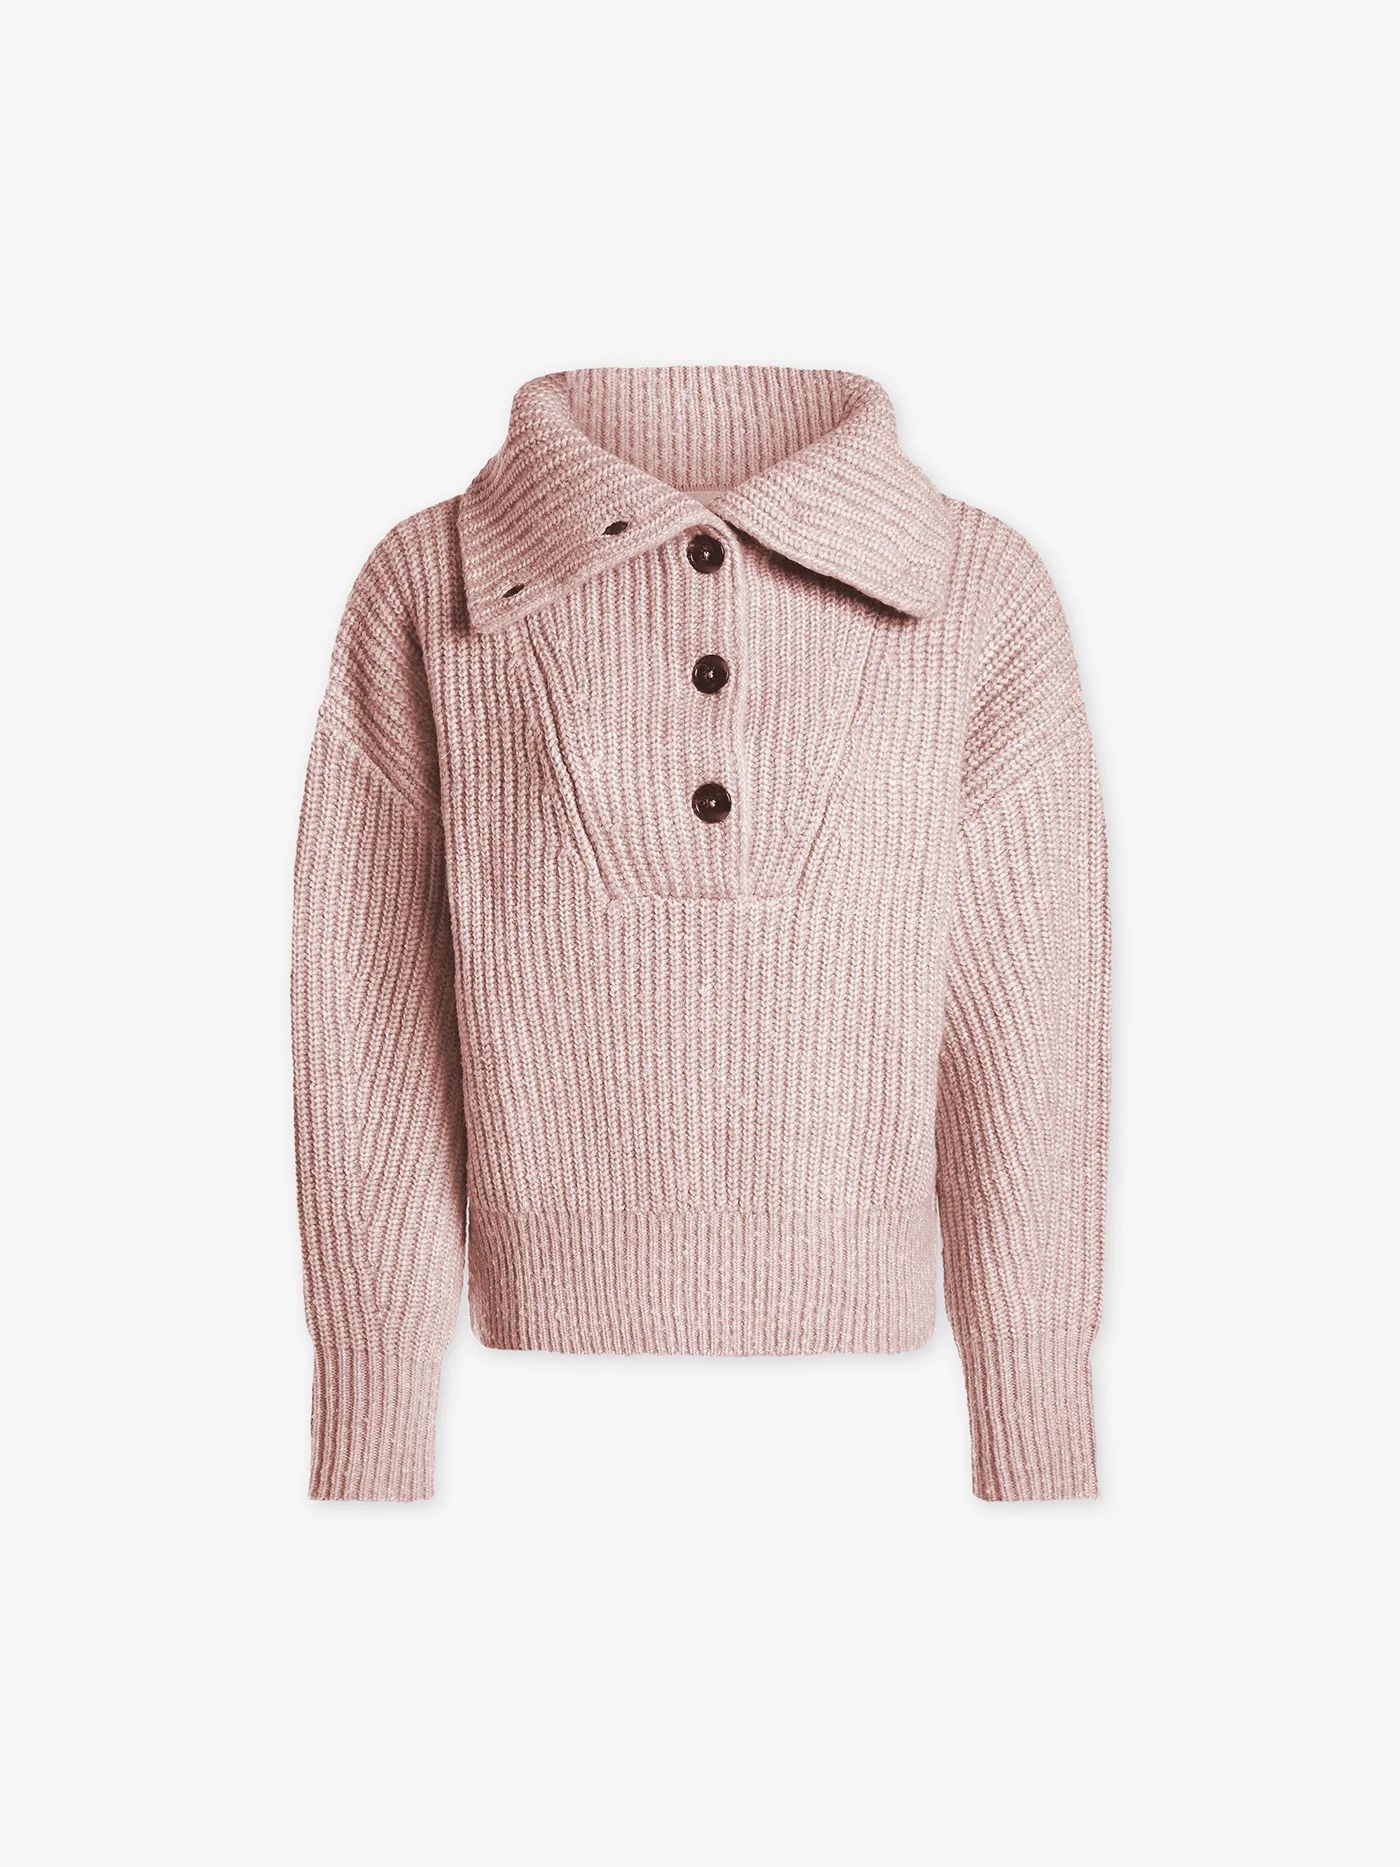 Peverel Button Placket KnitA knitted take on our bestselling Vine, this pullover is a warm and el... | Varley USA